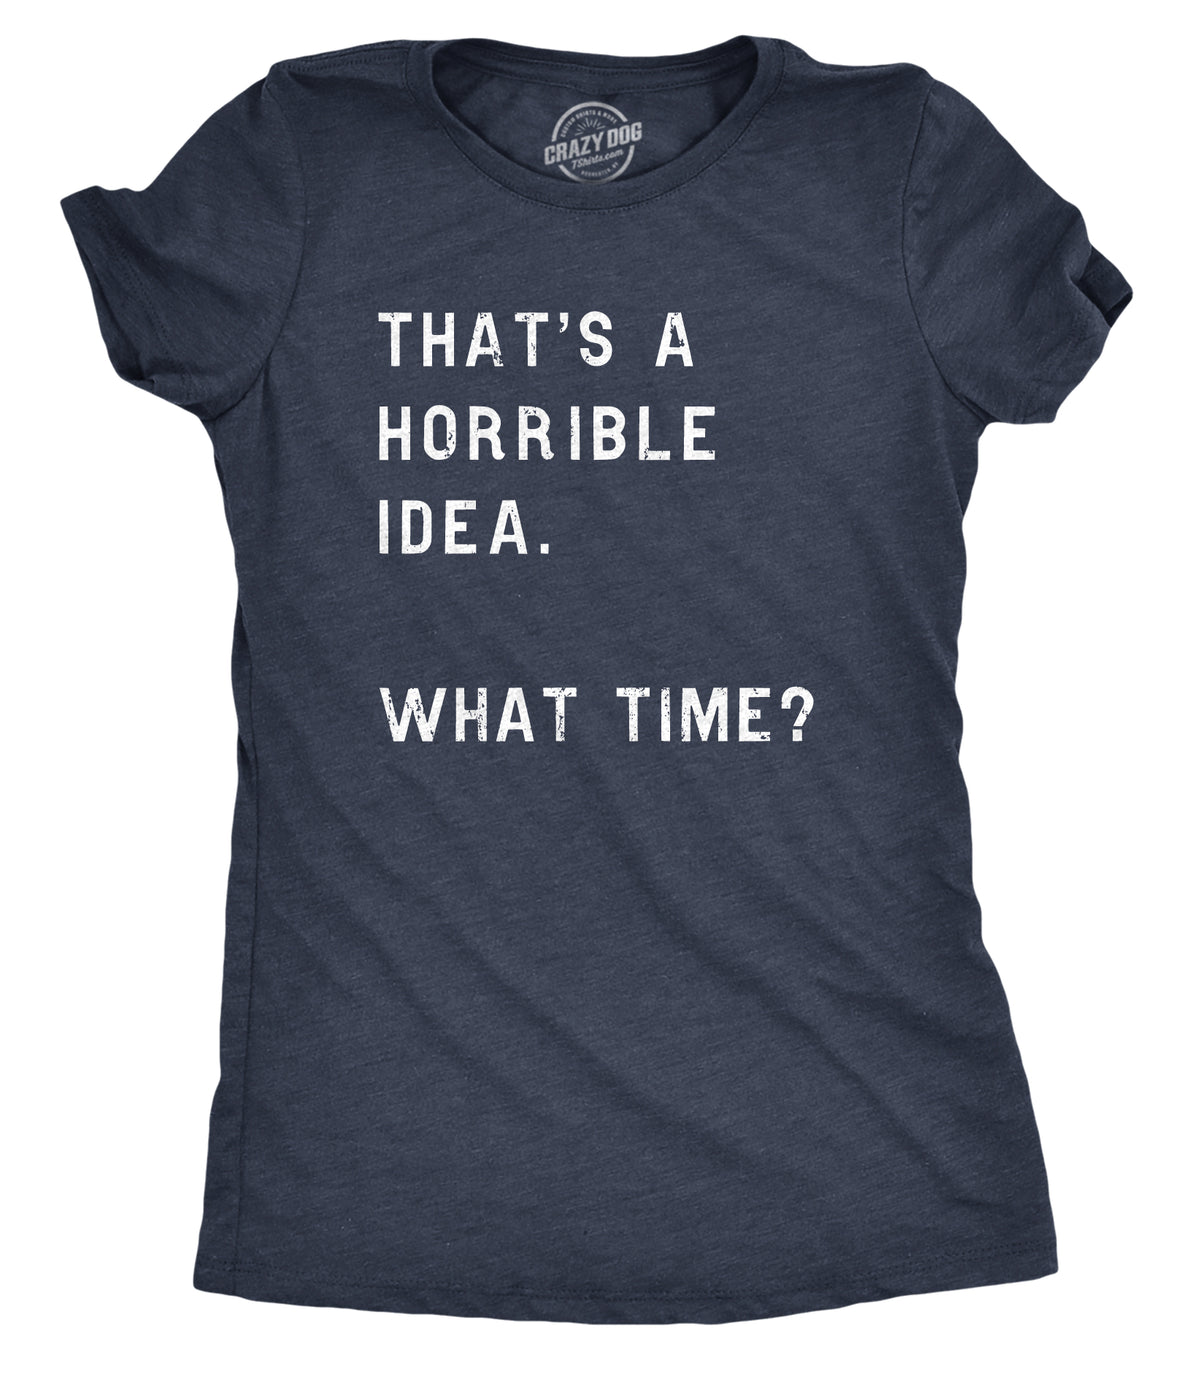 Funny Heather Navy That Sounds Like A Horrible Idea. What Time? Womens T Shirt Nerdy Sarcastic Tee